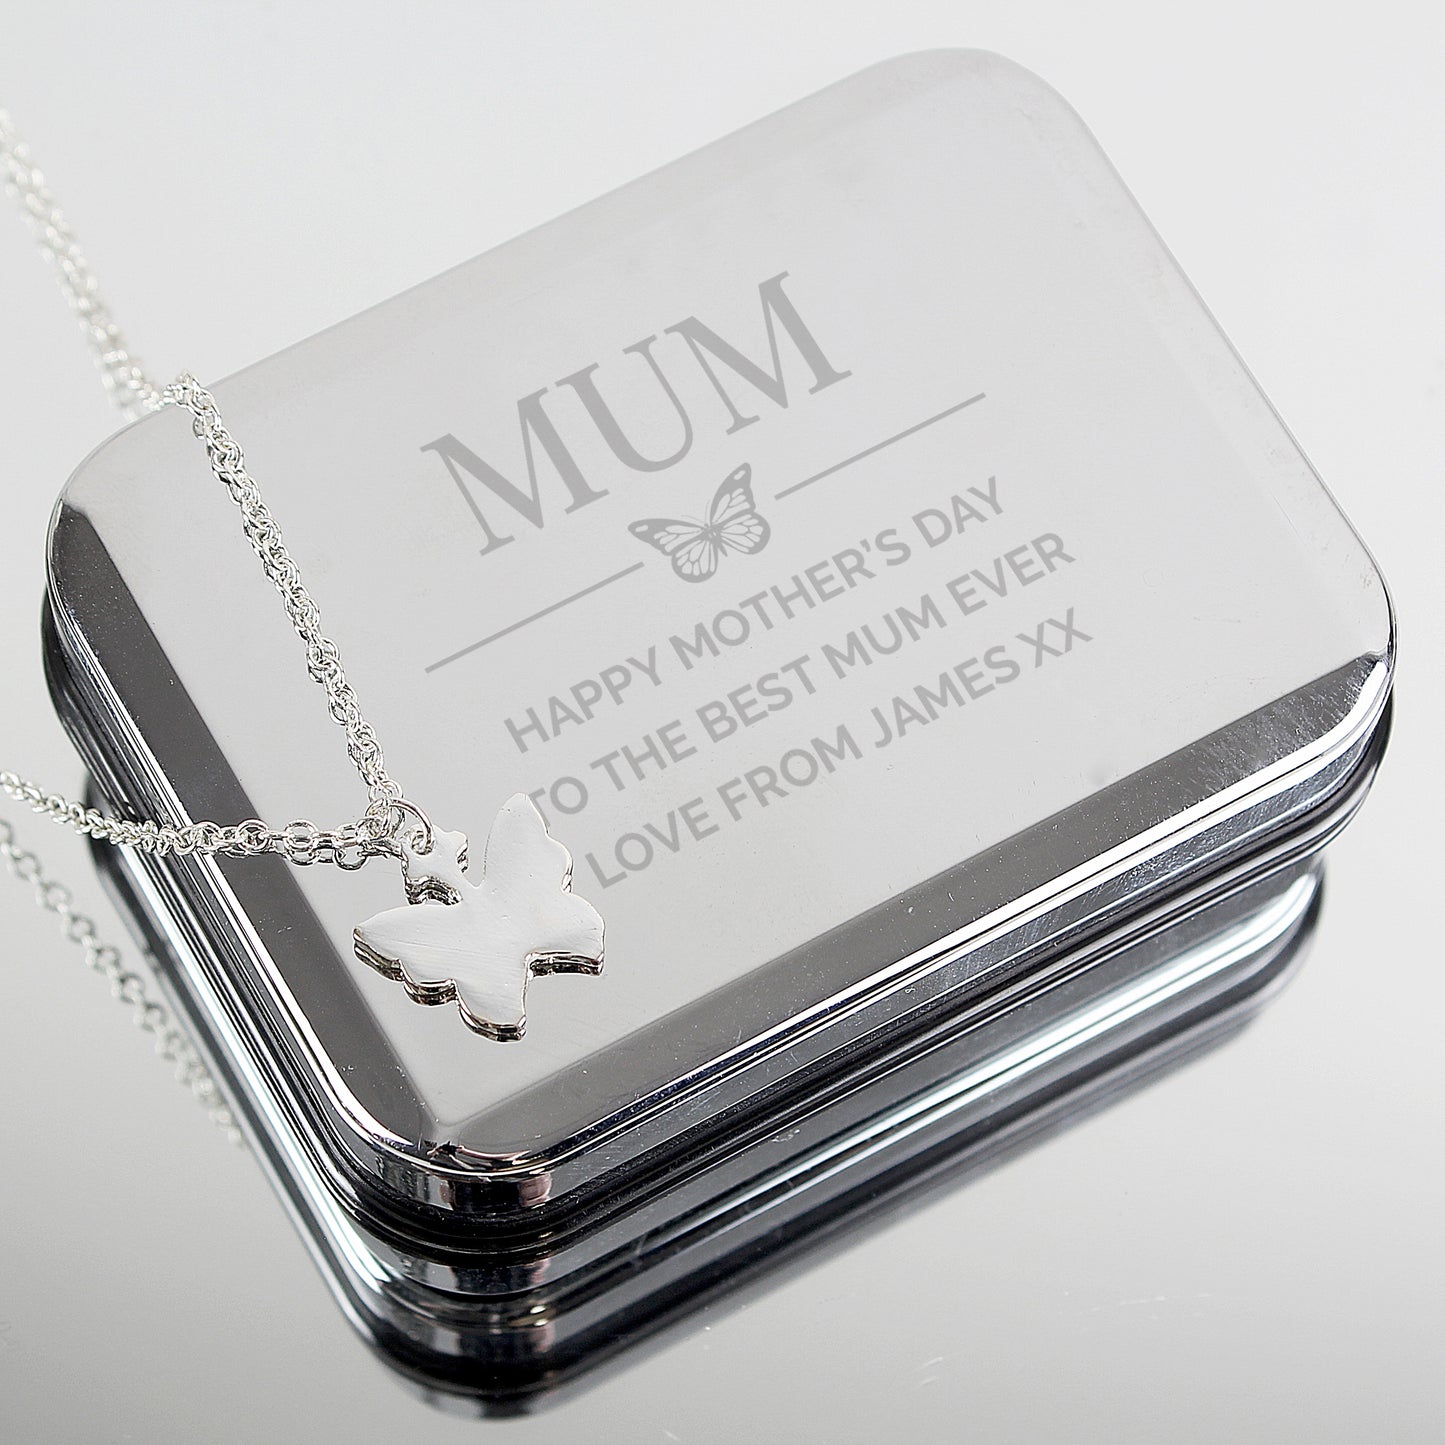 Personalised Box and Butterfly Necklace - Personalise It!